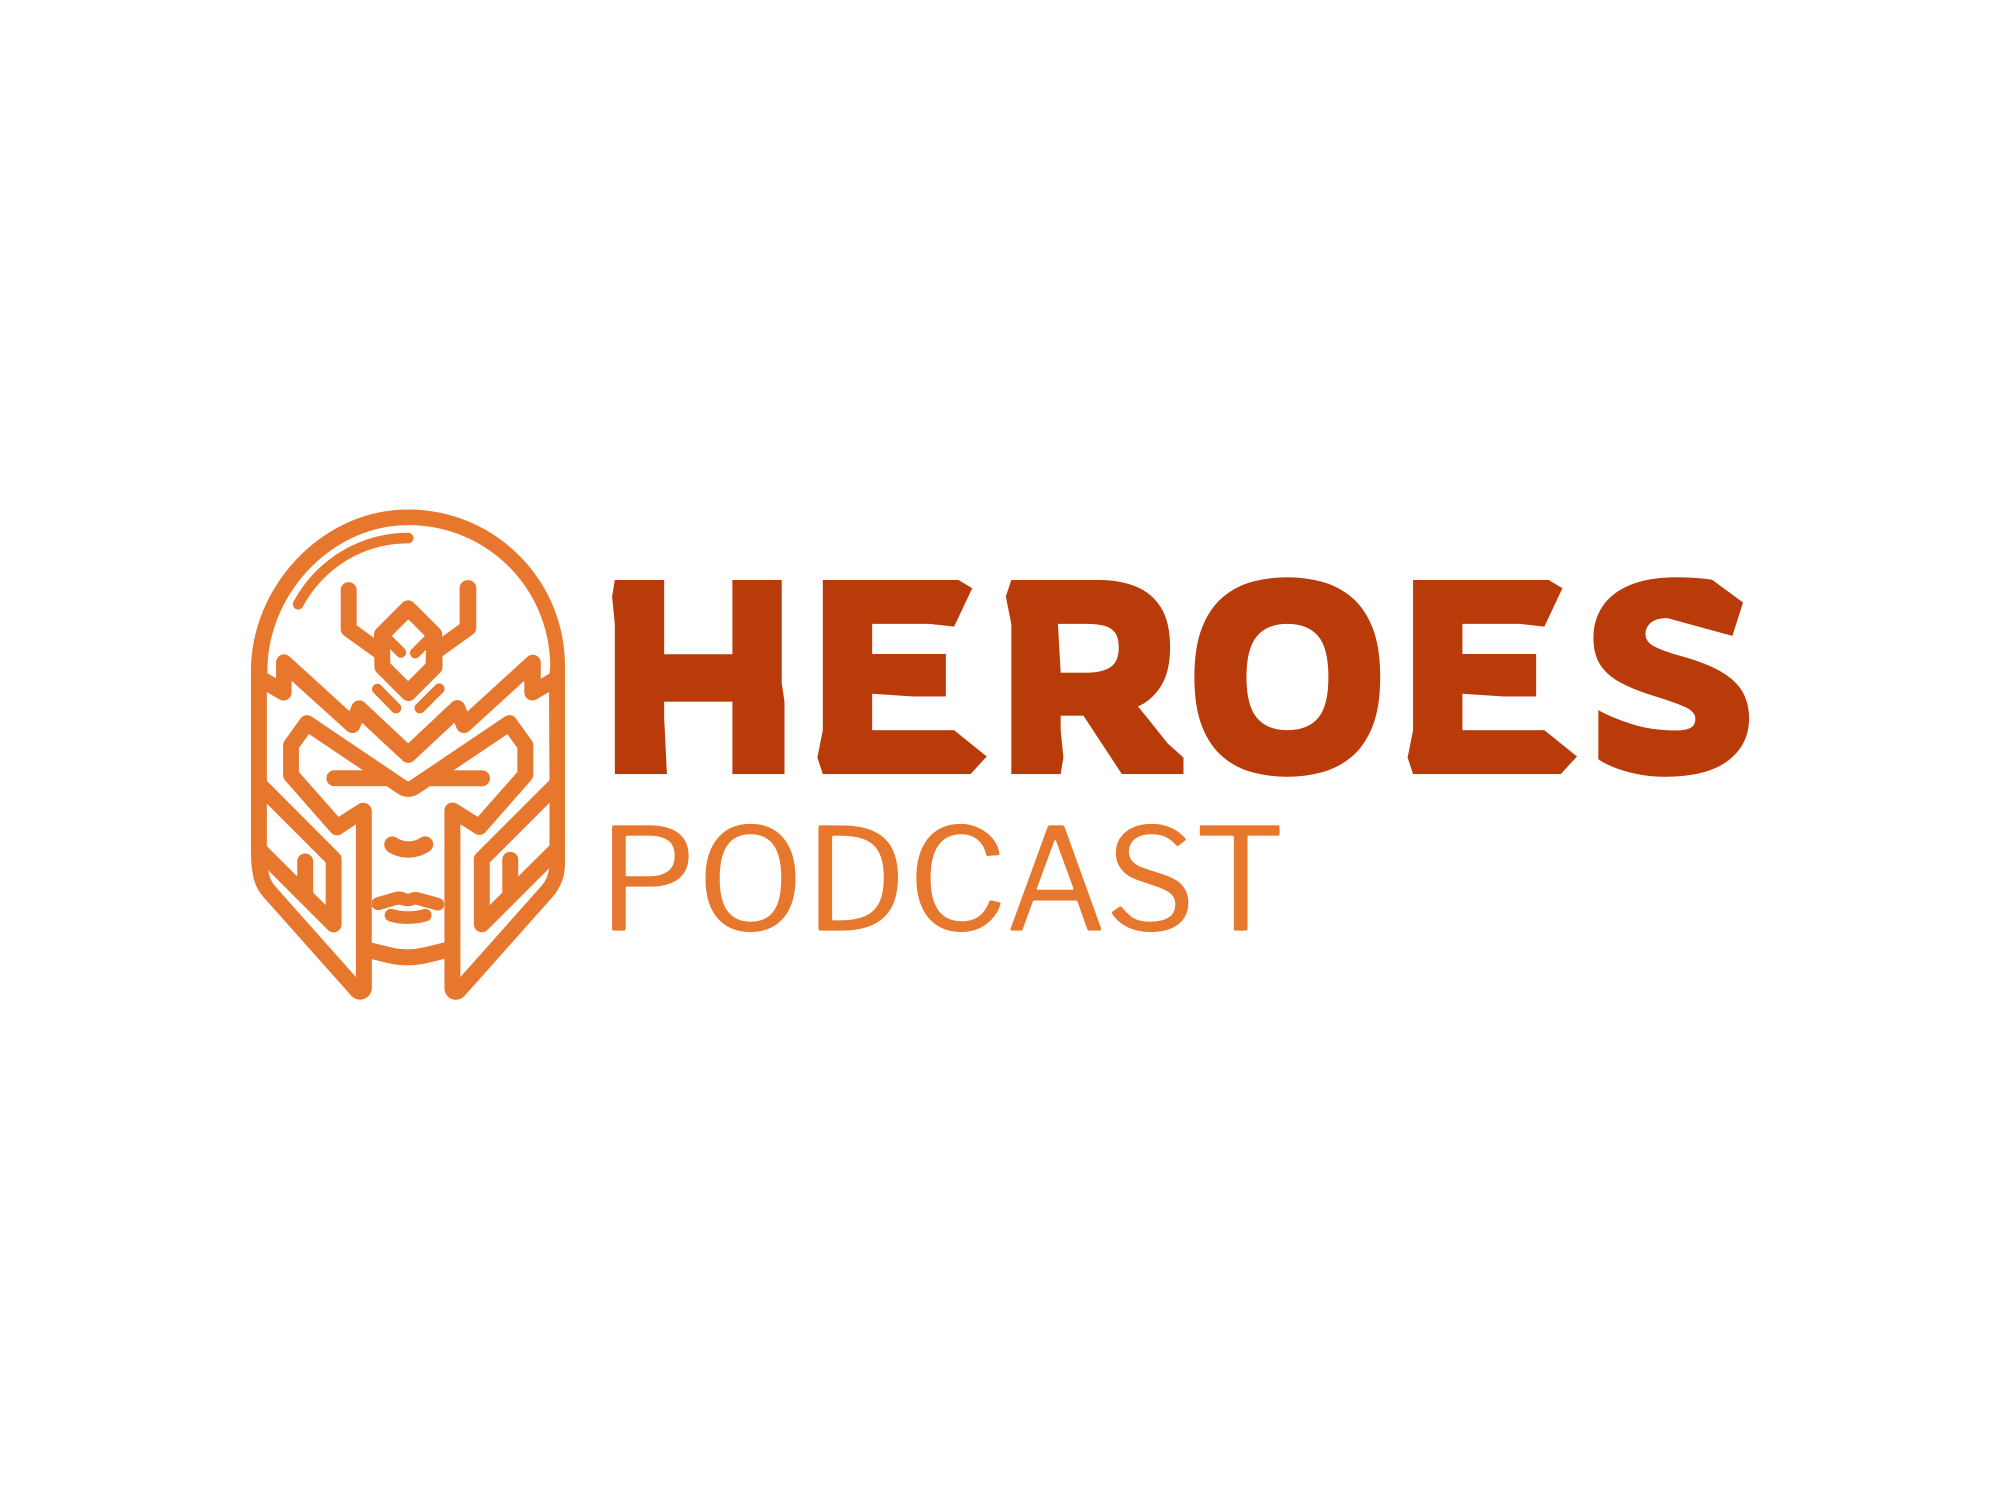 The Heroes Podcast